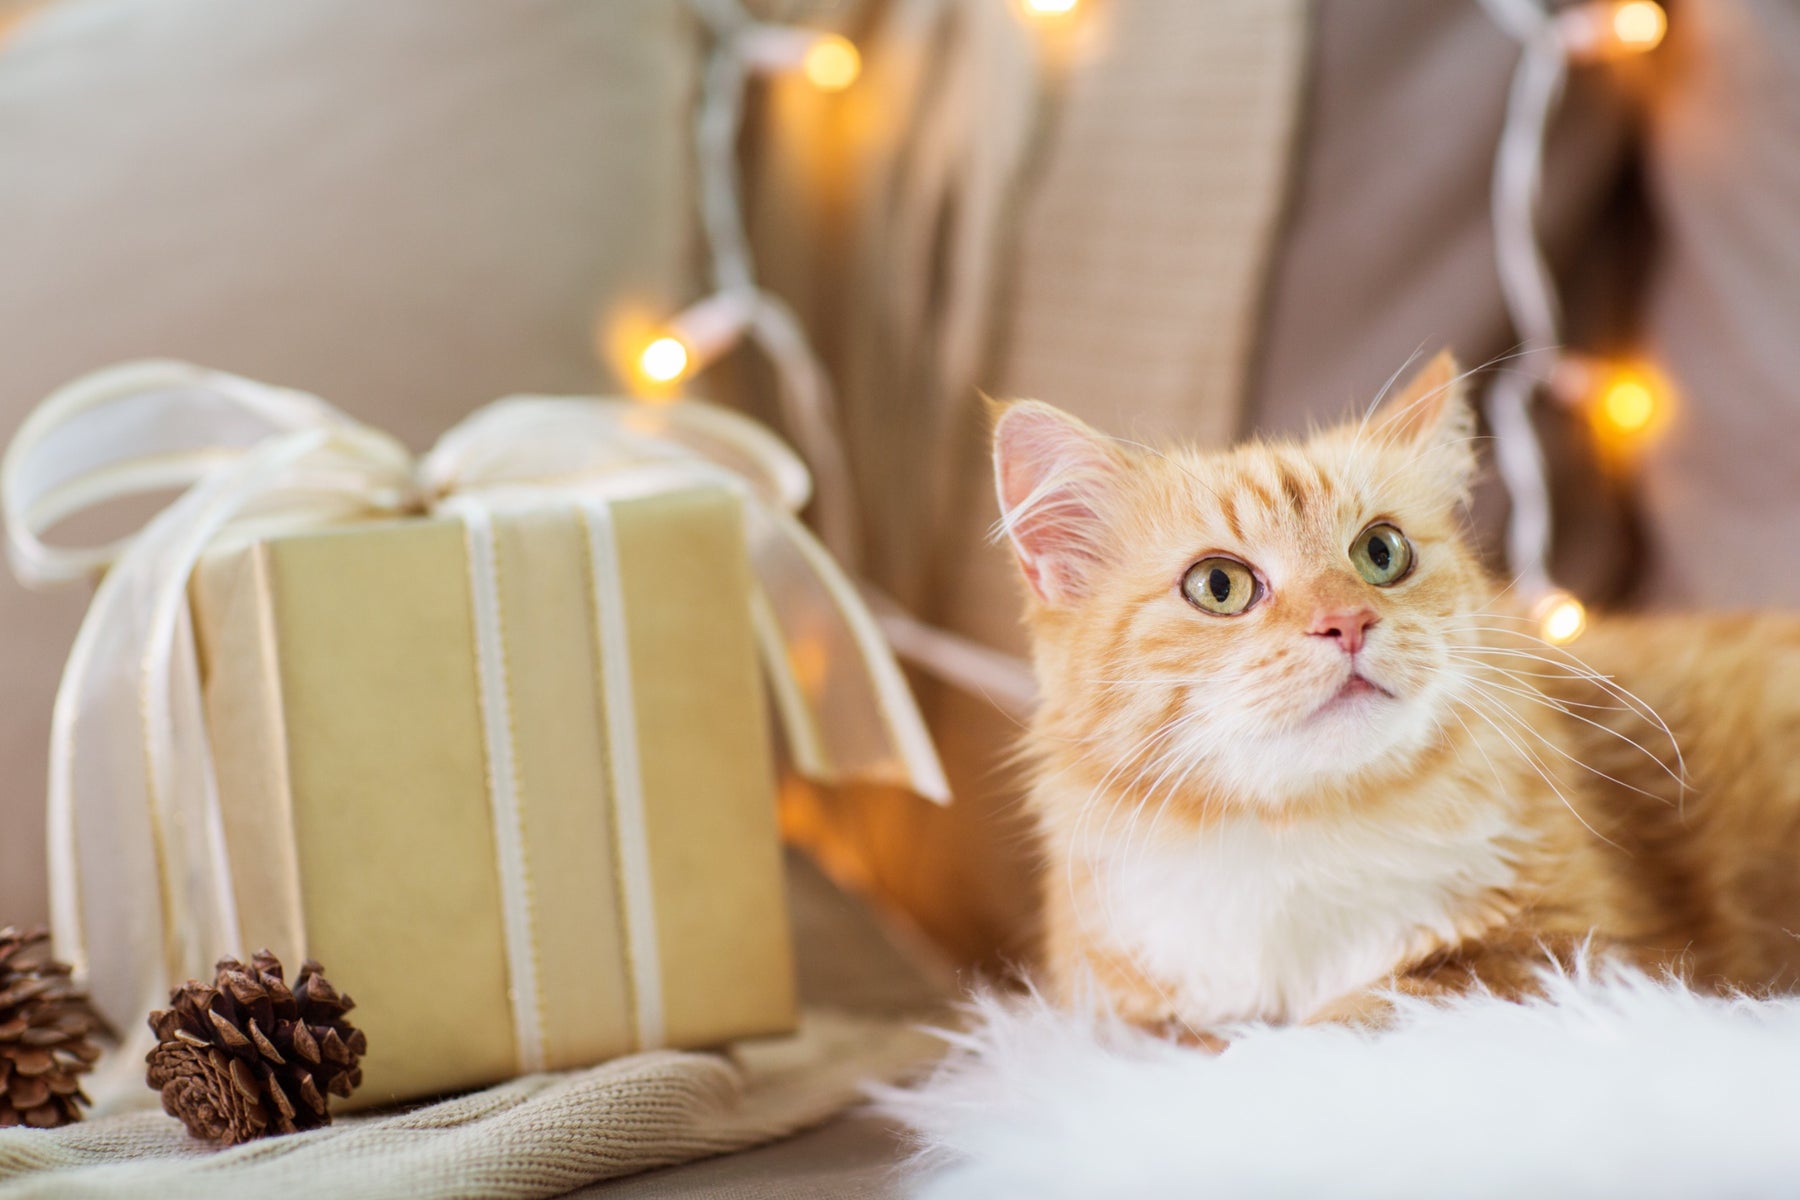 The 26 best gifts for cat lovers, according to pet experts